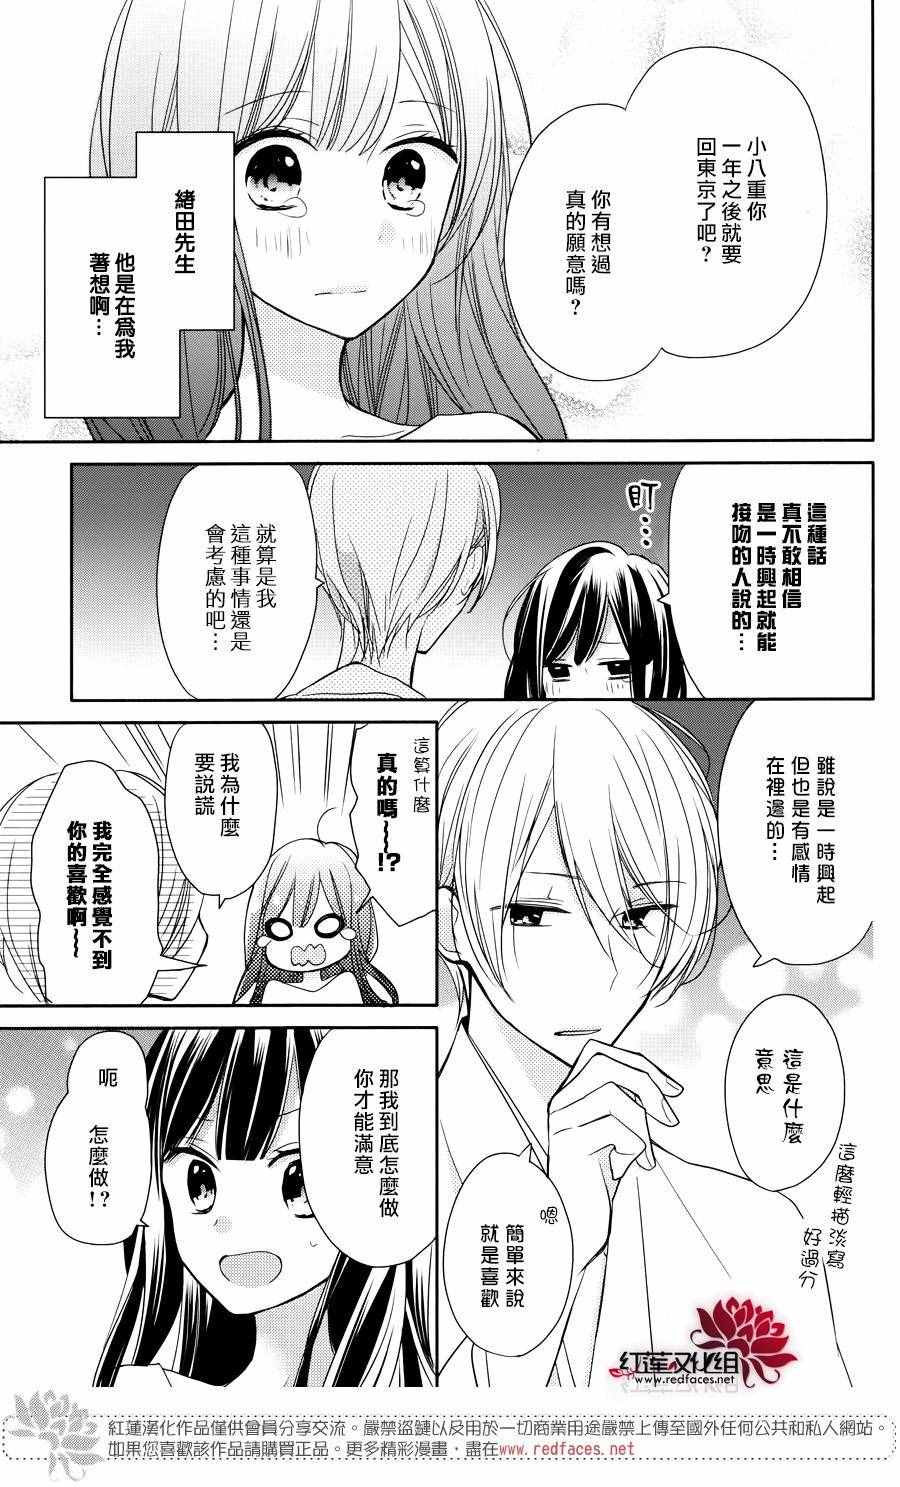 《If given a second chance》漫画 second chance 005话